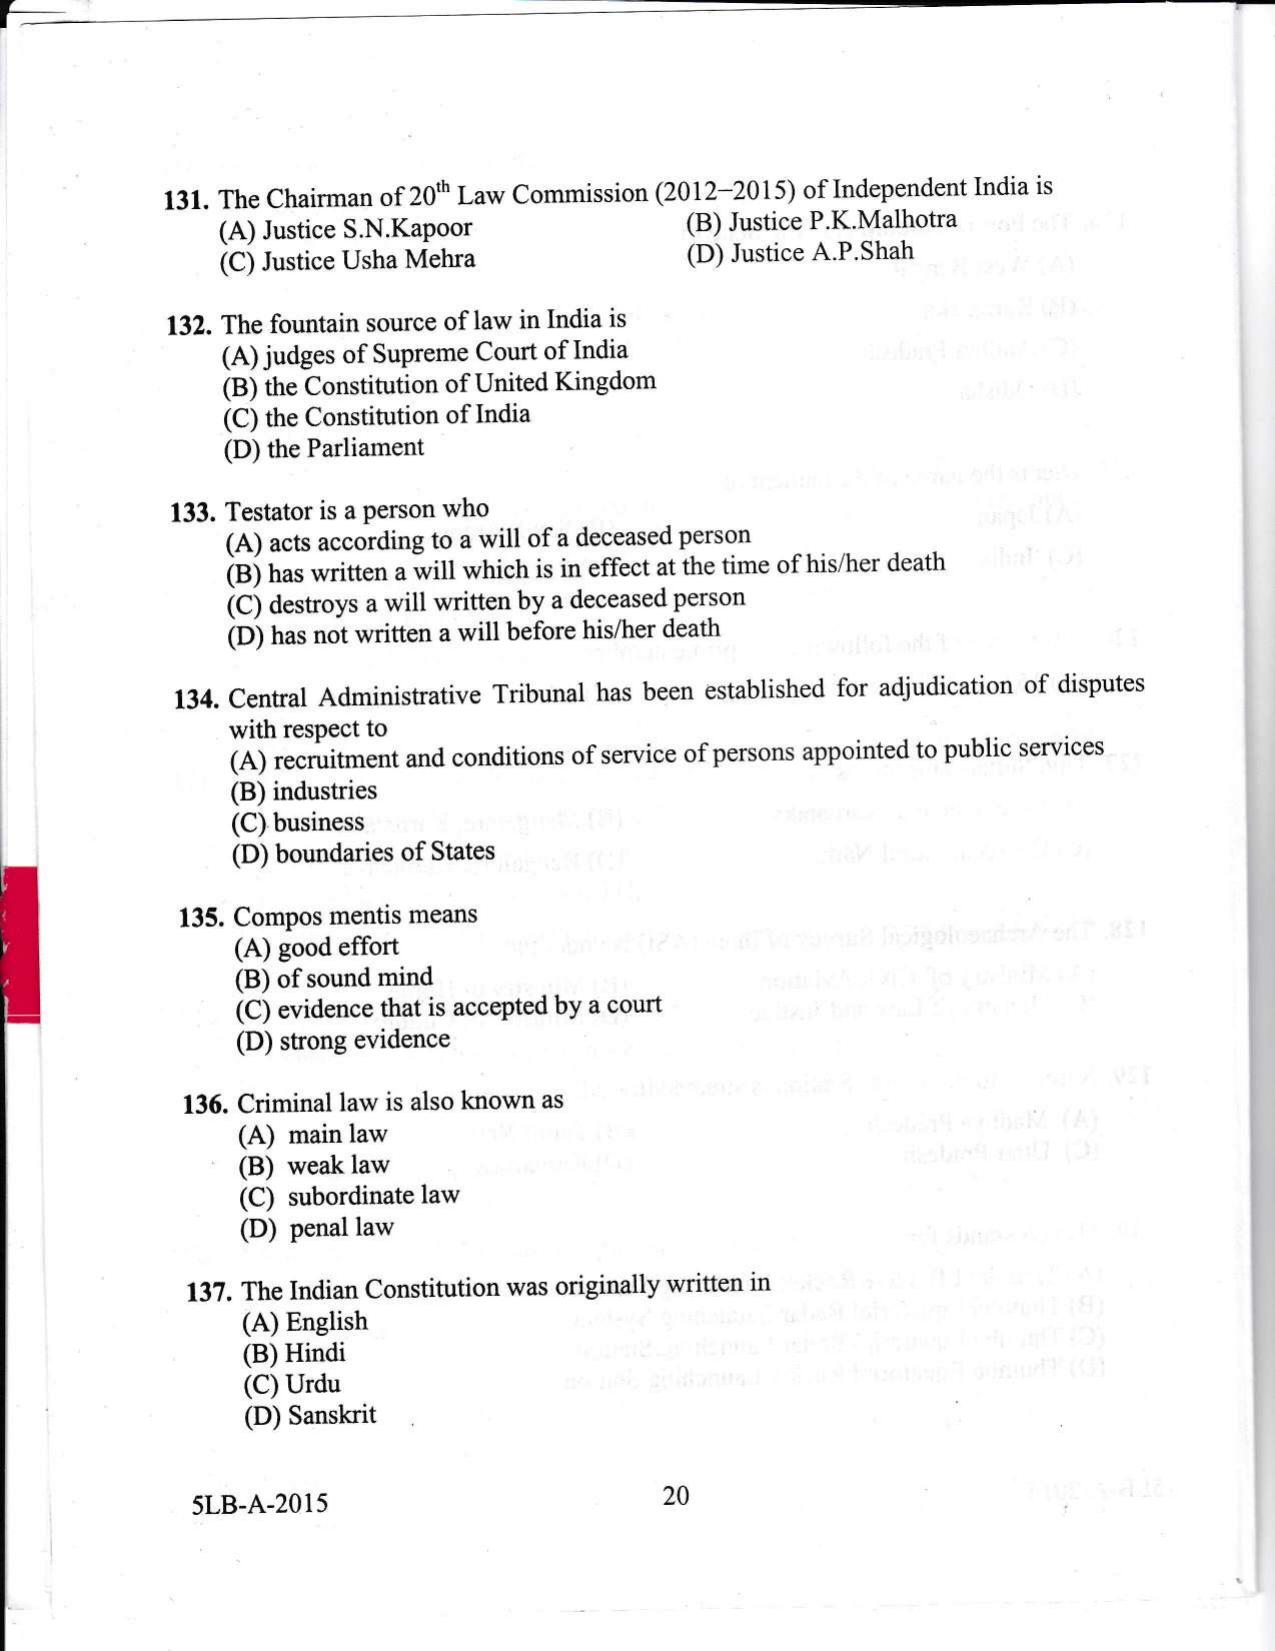 KLEE 5 Year LLB Exam 2015 Question Paper - Page 20